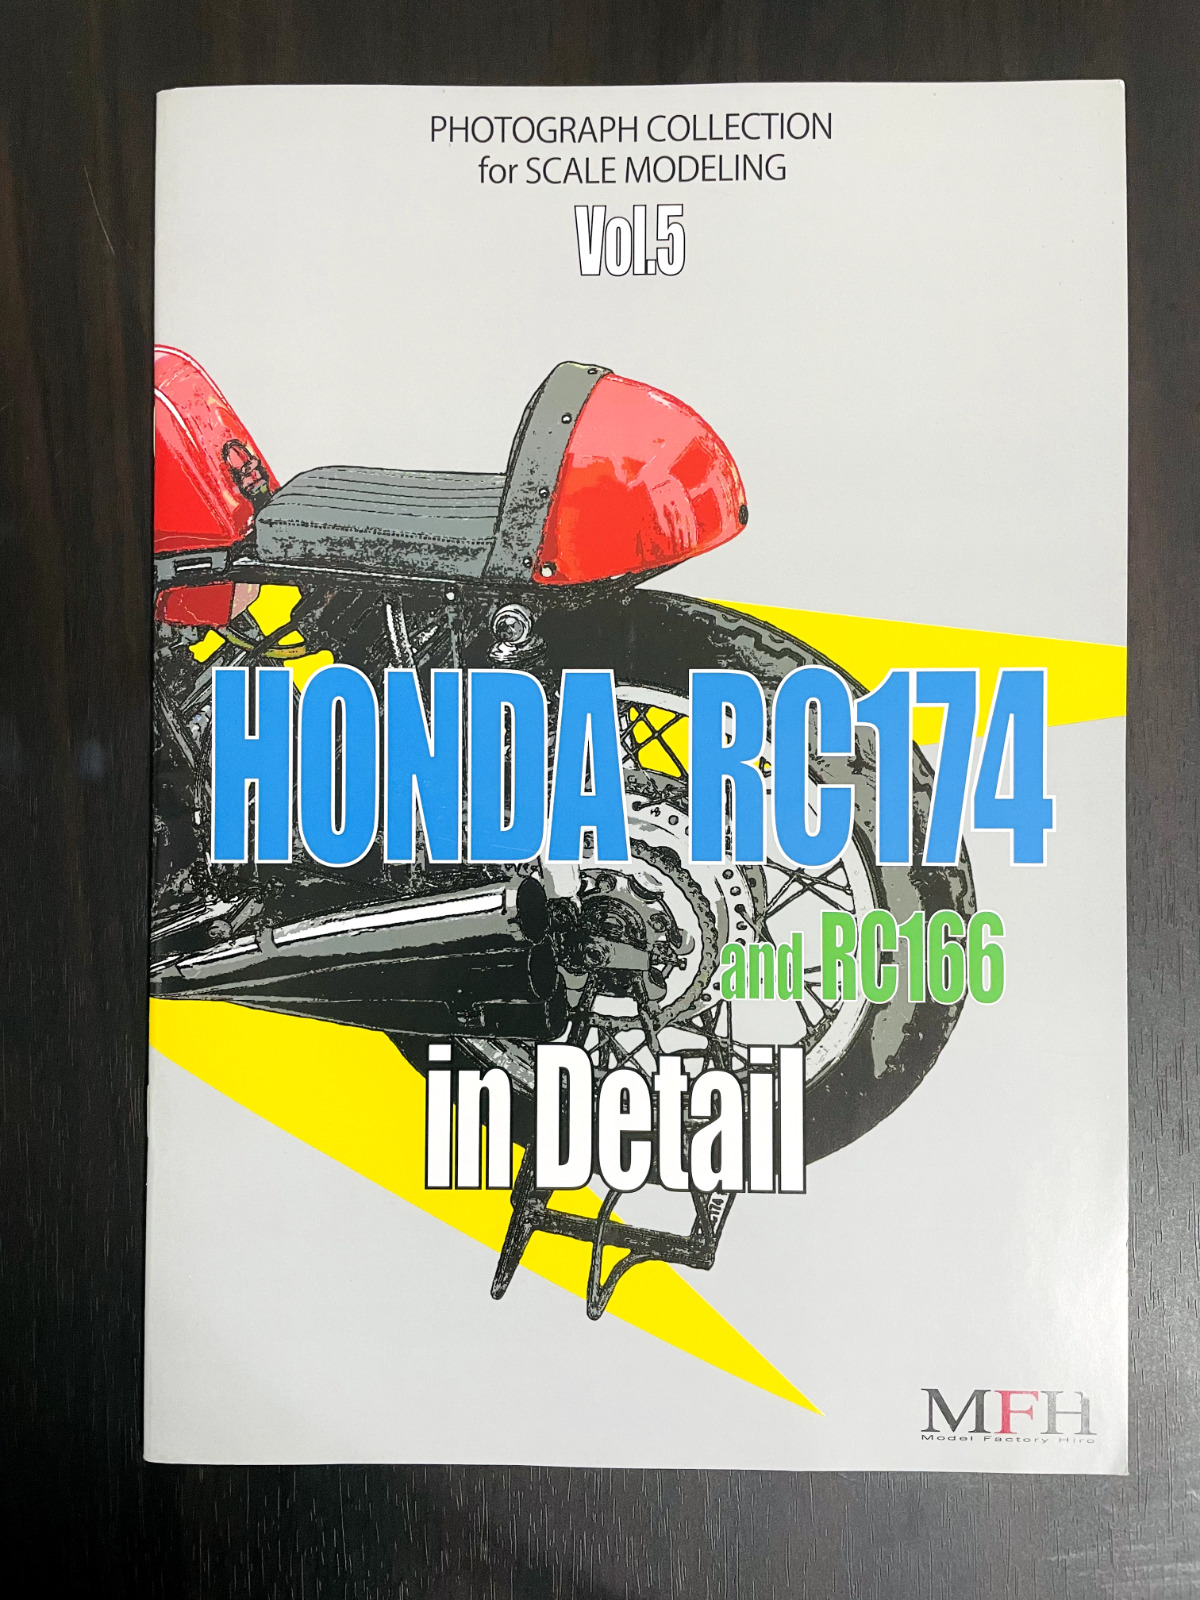 HONDA RC174 and 166 in Detail PHOTOGRAPH COLLECTION for SCALE MODELING No.5 Book